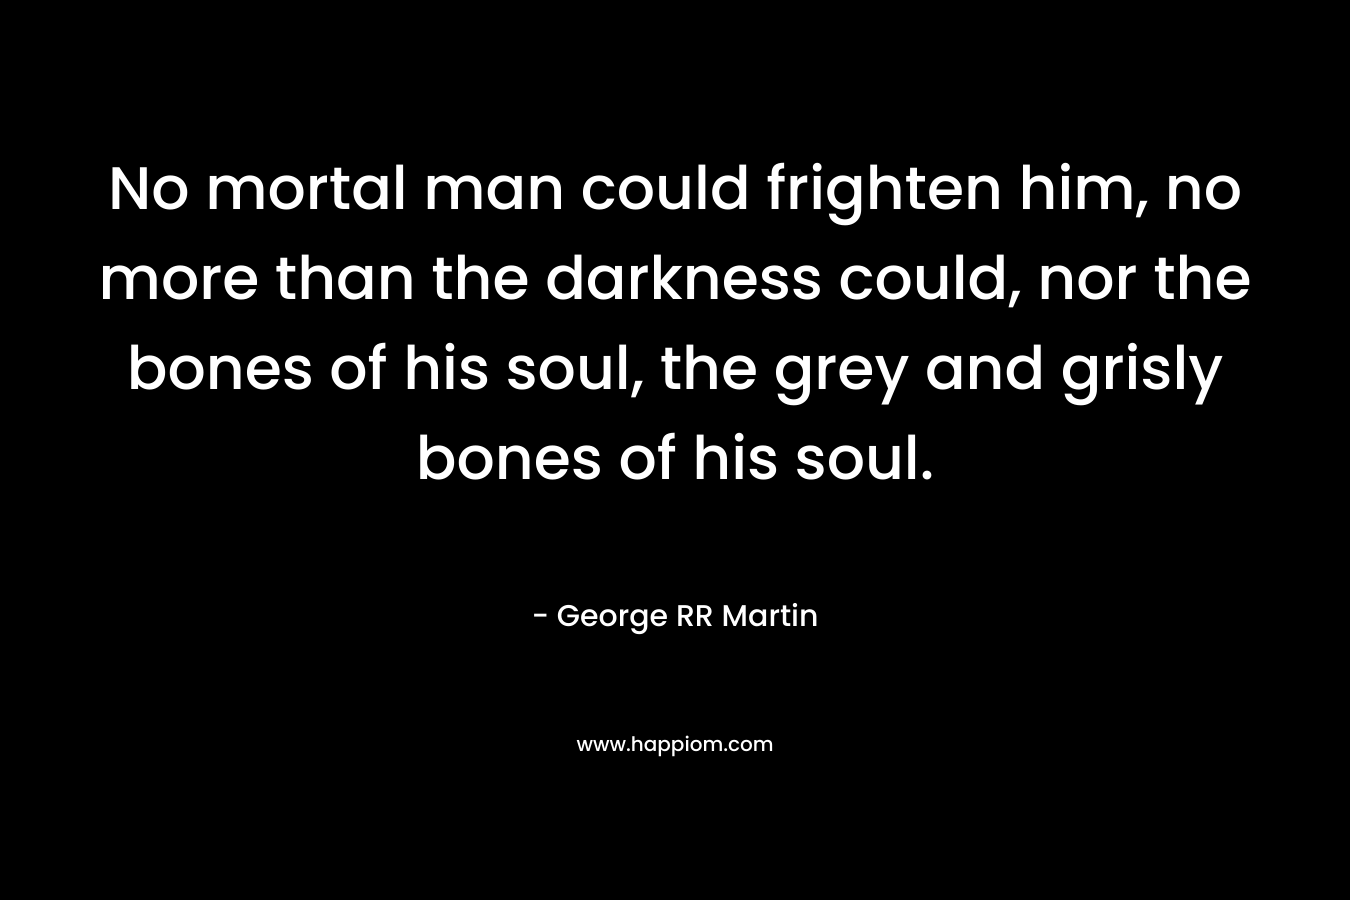 No mortal man could frighten him, no more than the darkness could, nor the bones of his soul, the grey and grisly bones of his soul. – George RR Martin